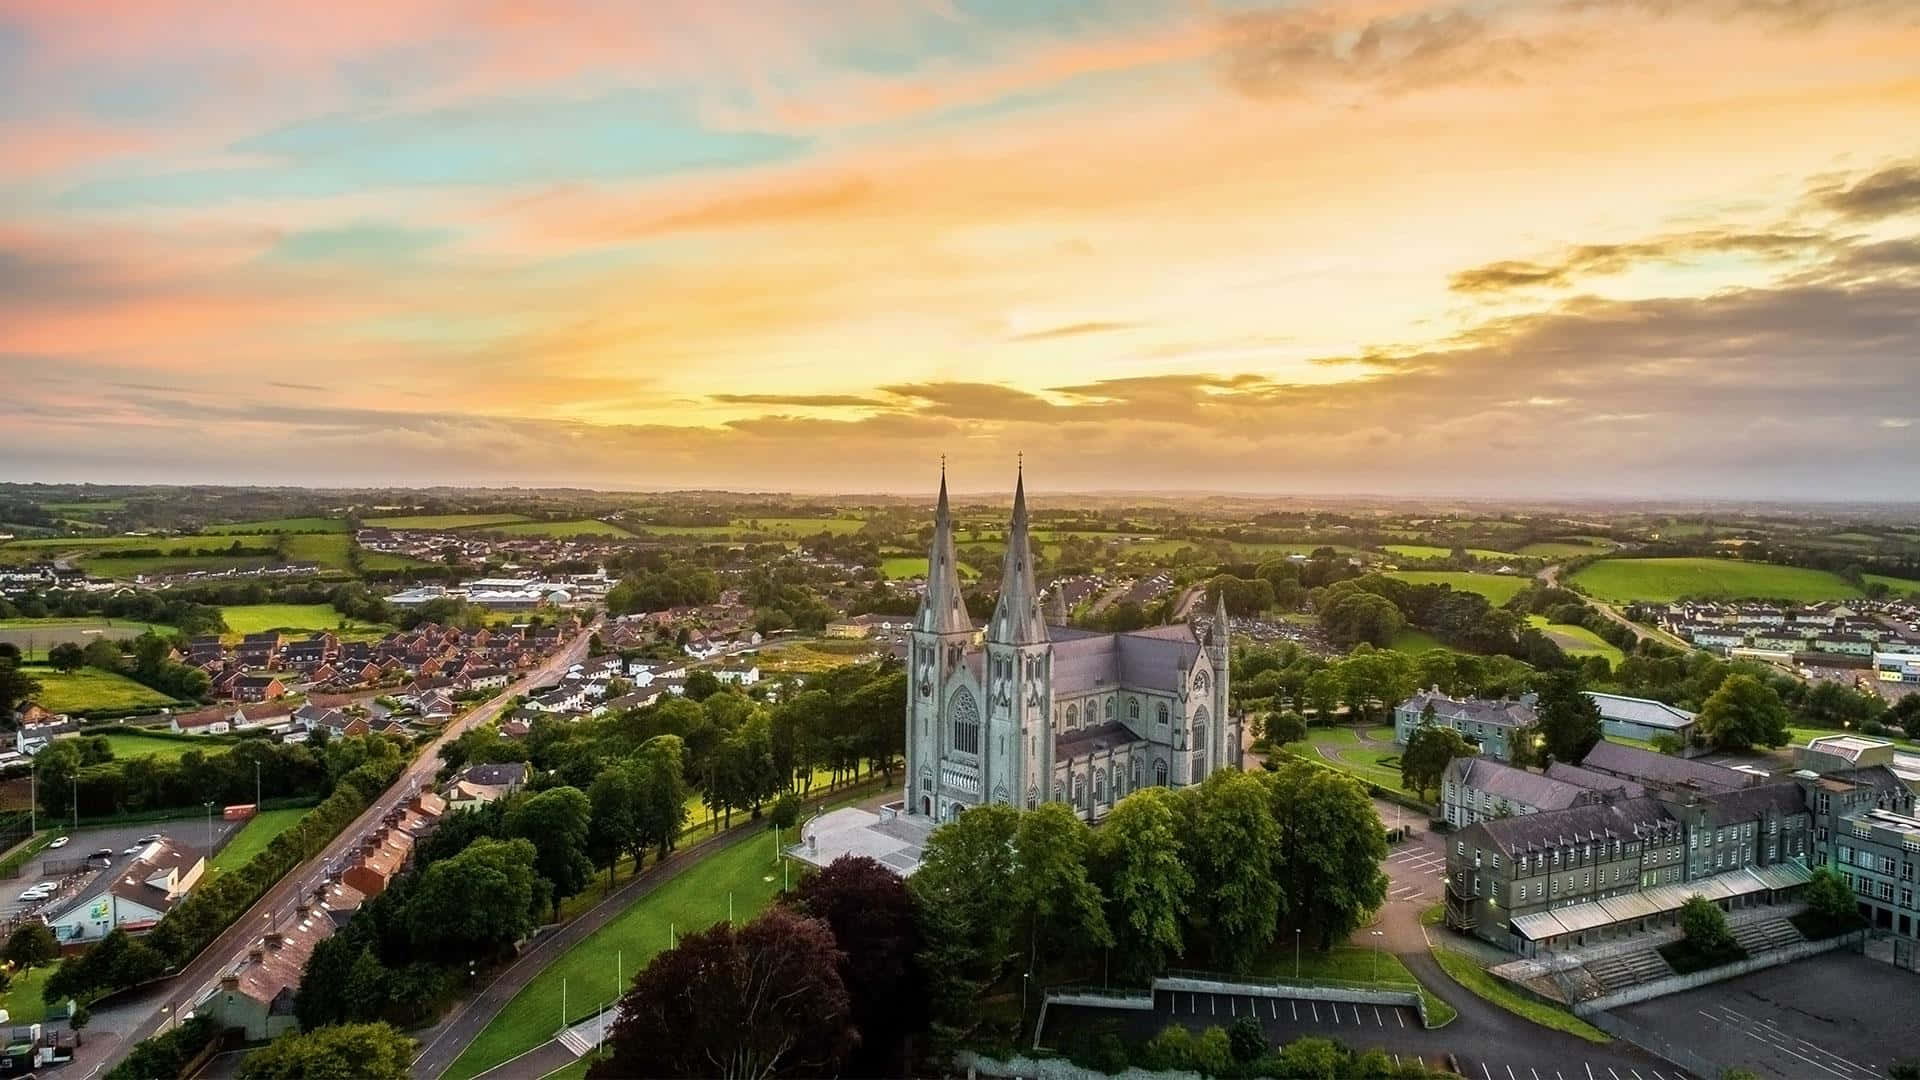 Armagh Cathedral Sunset Aerial View Wallpaper